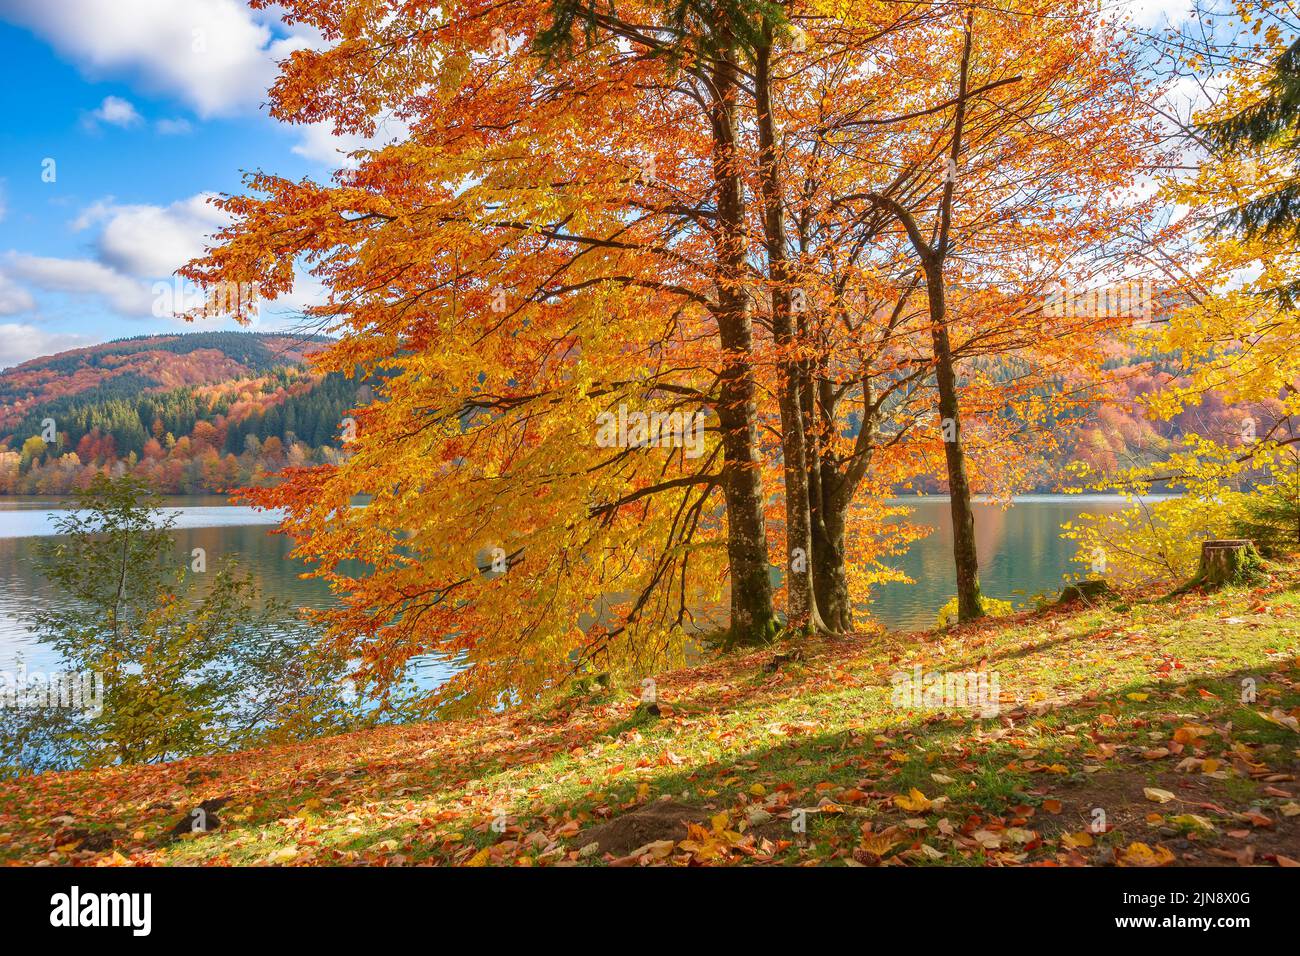 countryside scenery at the lake in autumn. forest in fall colors on the shore covered in fallen foliage. wonderful mountain landscape on a sunny after Stock Photo